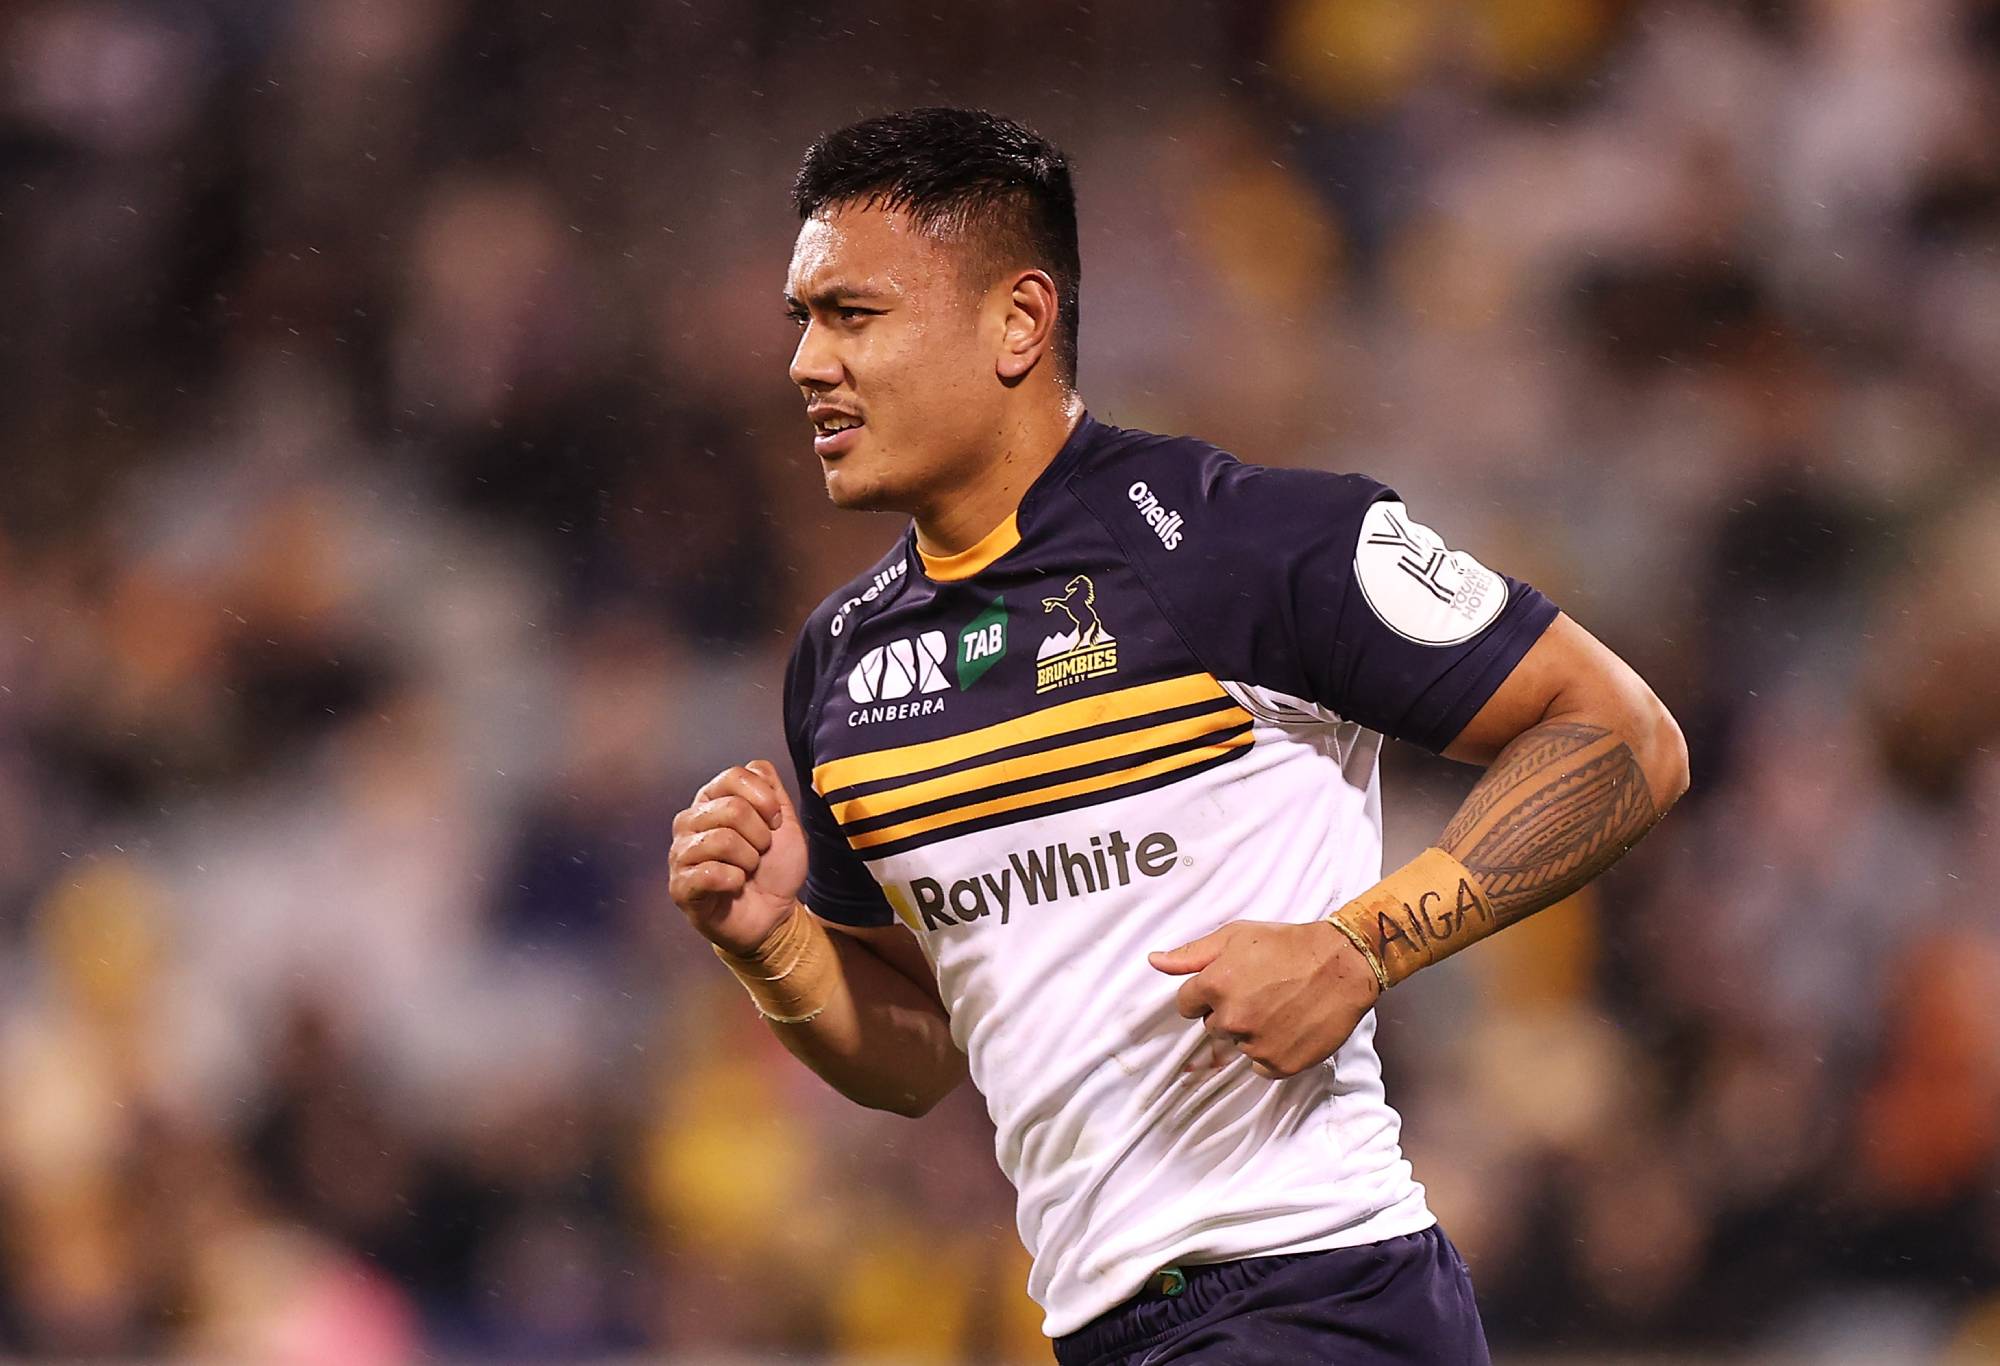 Len Ikitau of the Brumbies looks dejected as he leaves the field after being given a red card during the Super Rugby Pacific Quarter Final match between the ACT Brumbies and the Hurricanes at GIO Stadium on June 04, 2022 in Canberra, Australia. (Photo by Mark Kolbe/Getty Images)